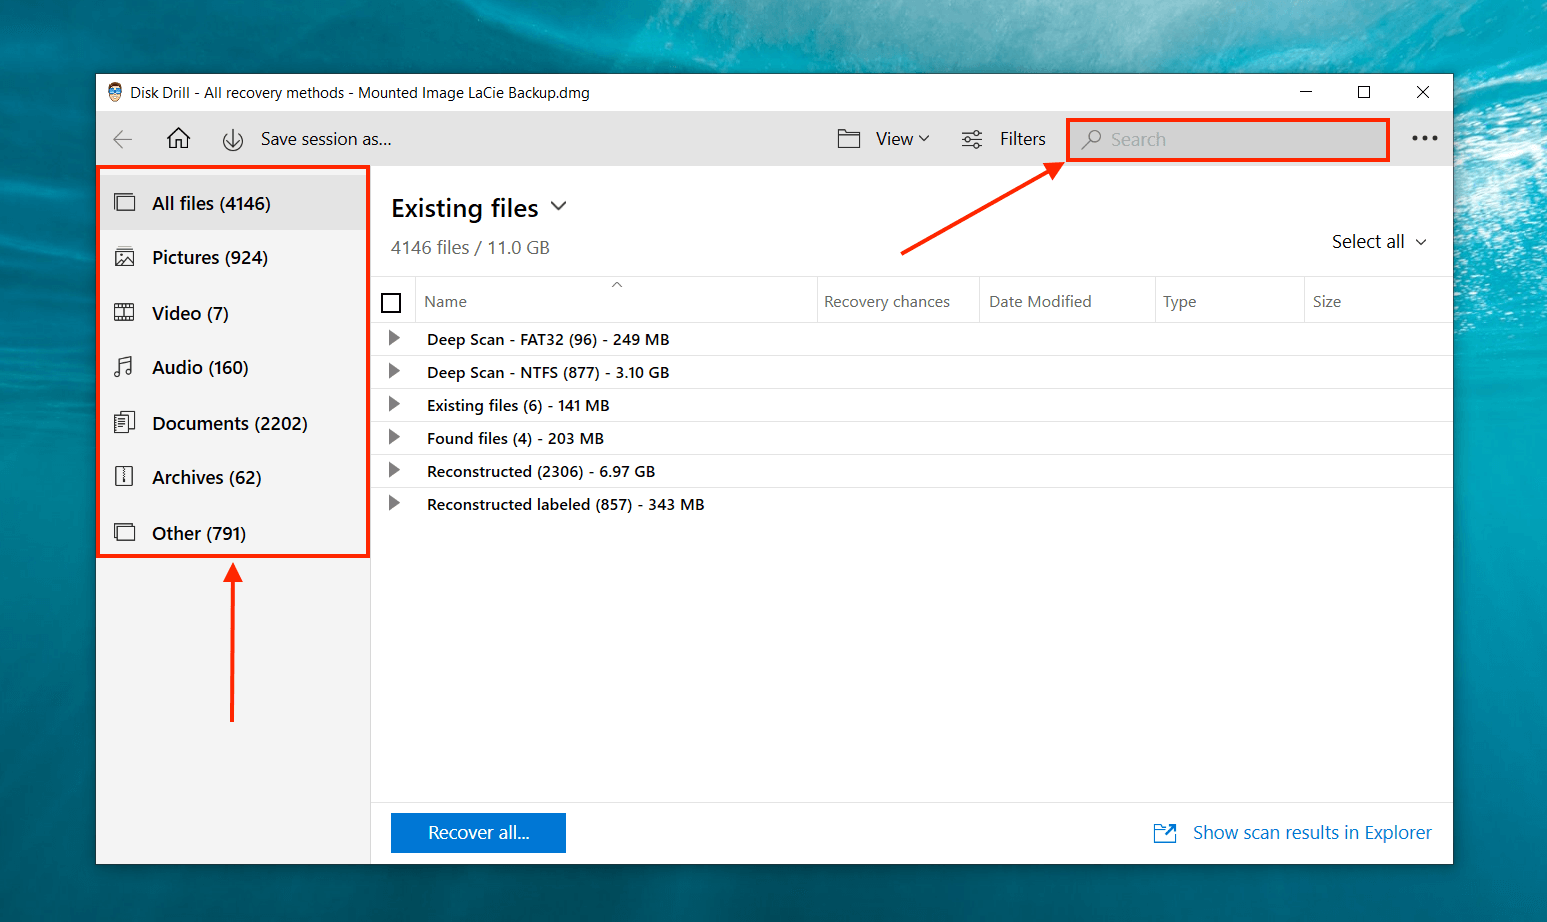 Disk Drill search bar and filter sidebar